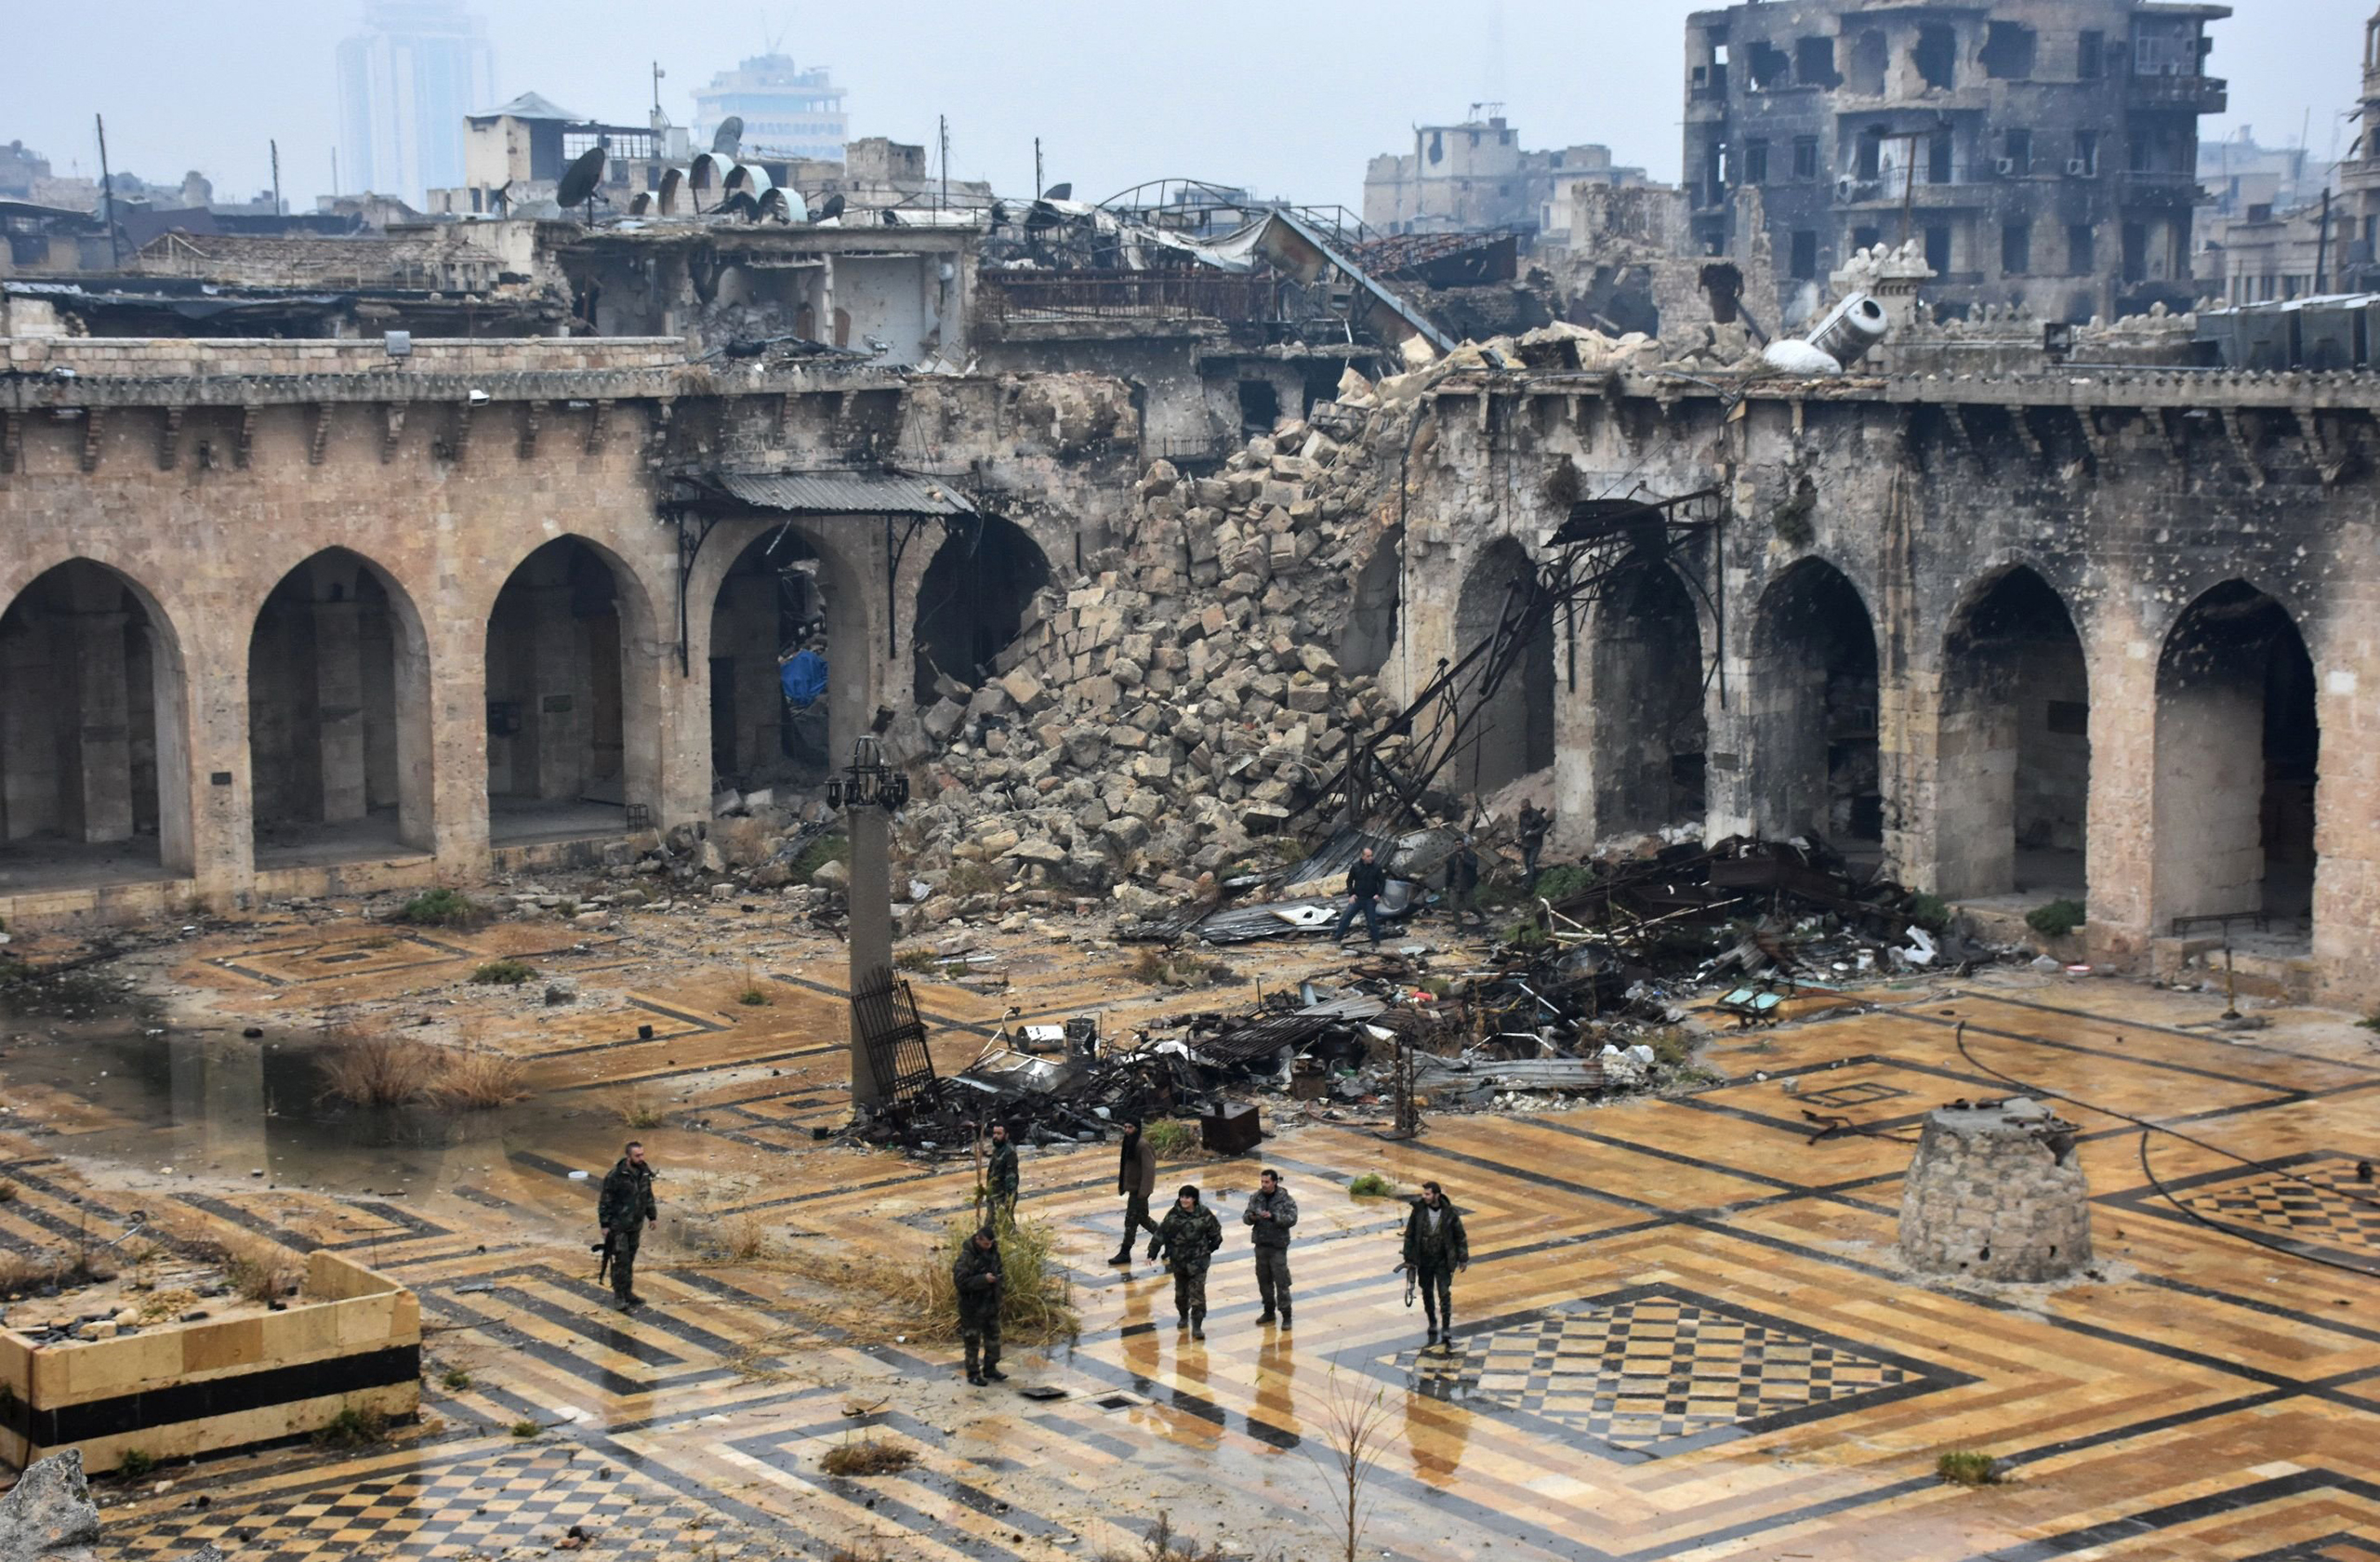 Syrian pro-government forces walk in the ancient Umayyad mosque in Aleppo after they captured the area on Dec. 13, 2016. (George Ourfalian—AFP/Getty Images)